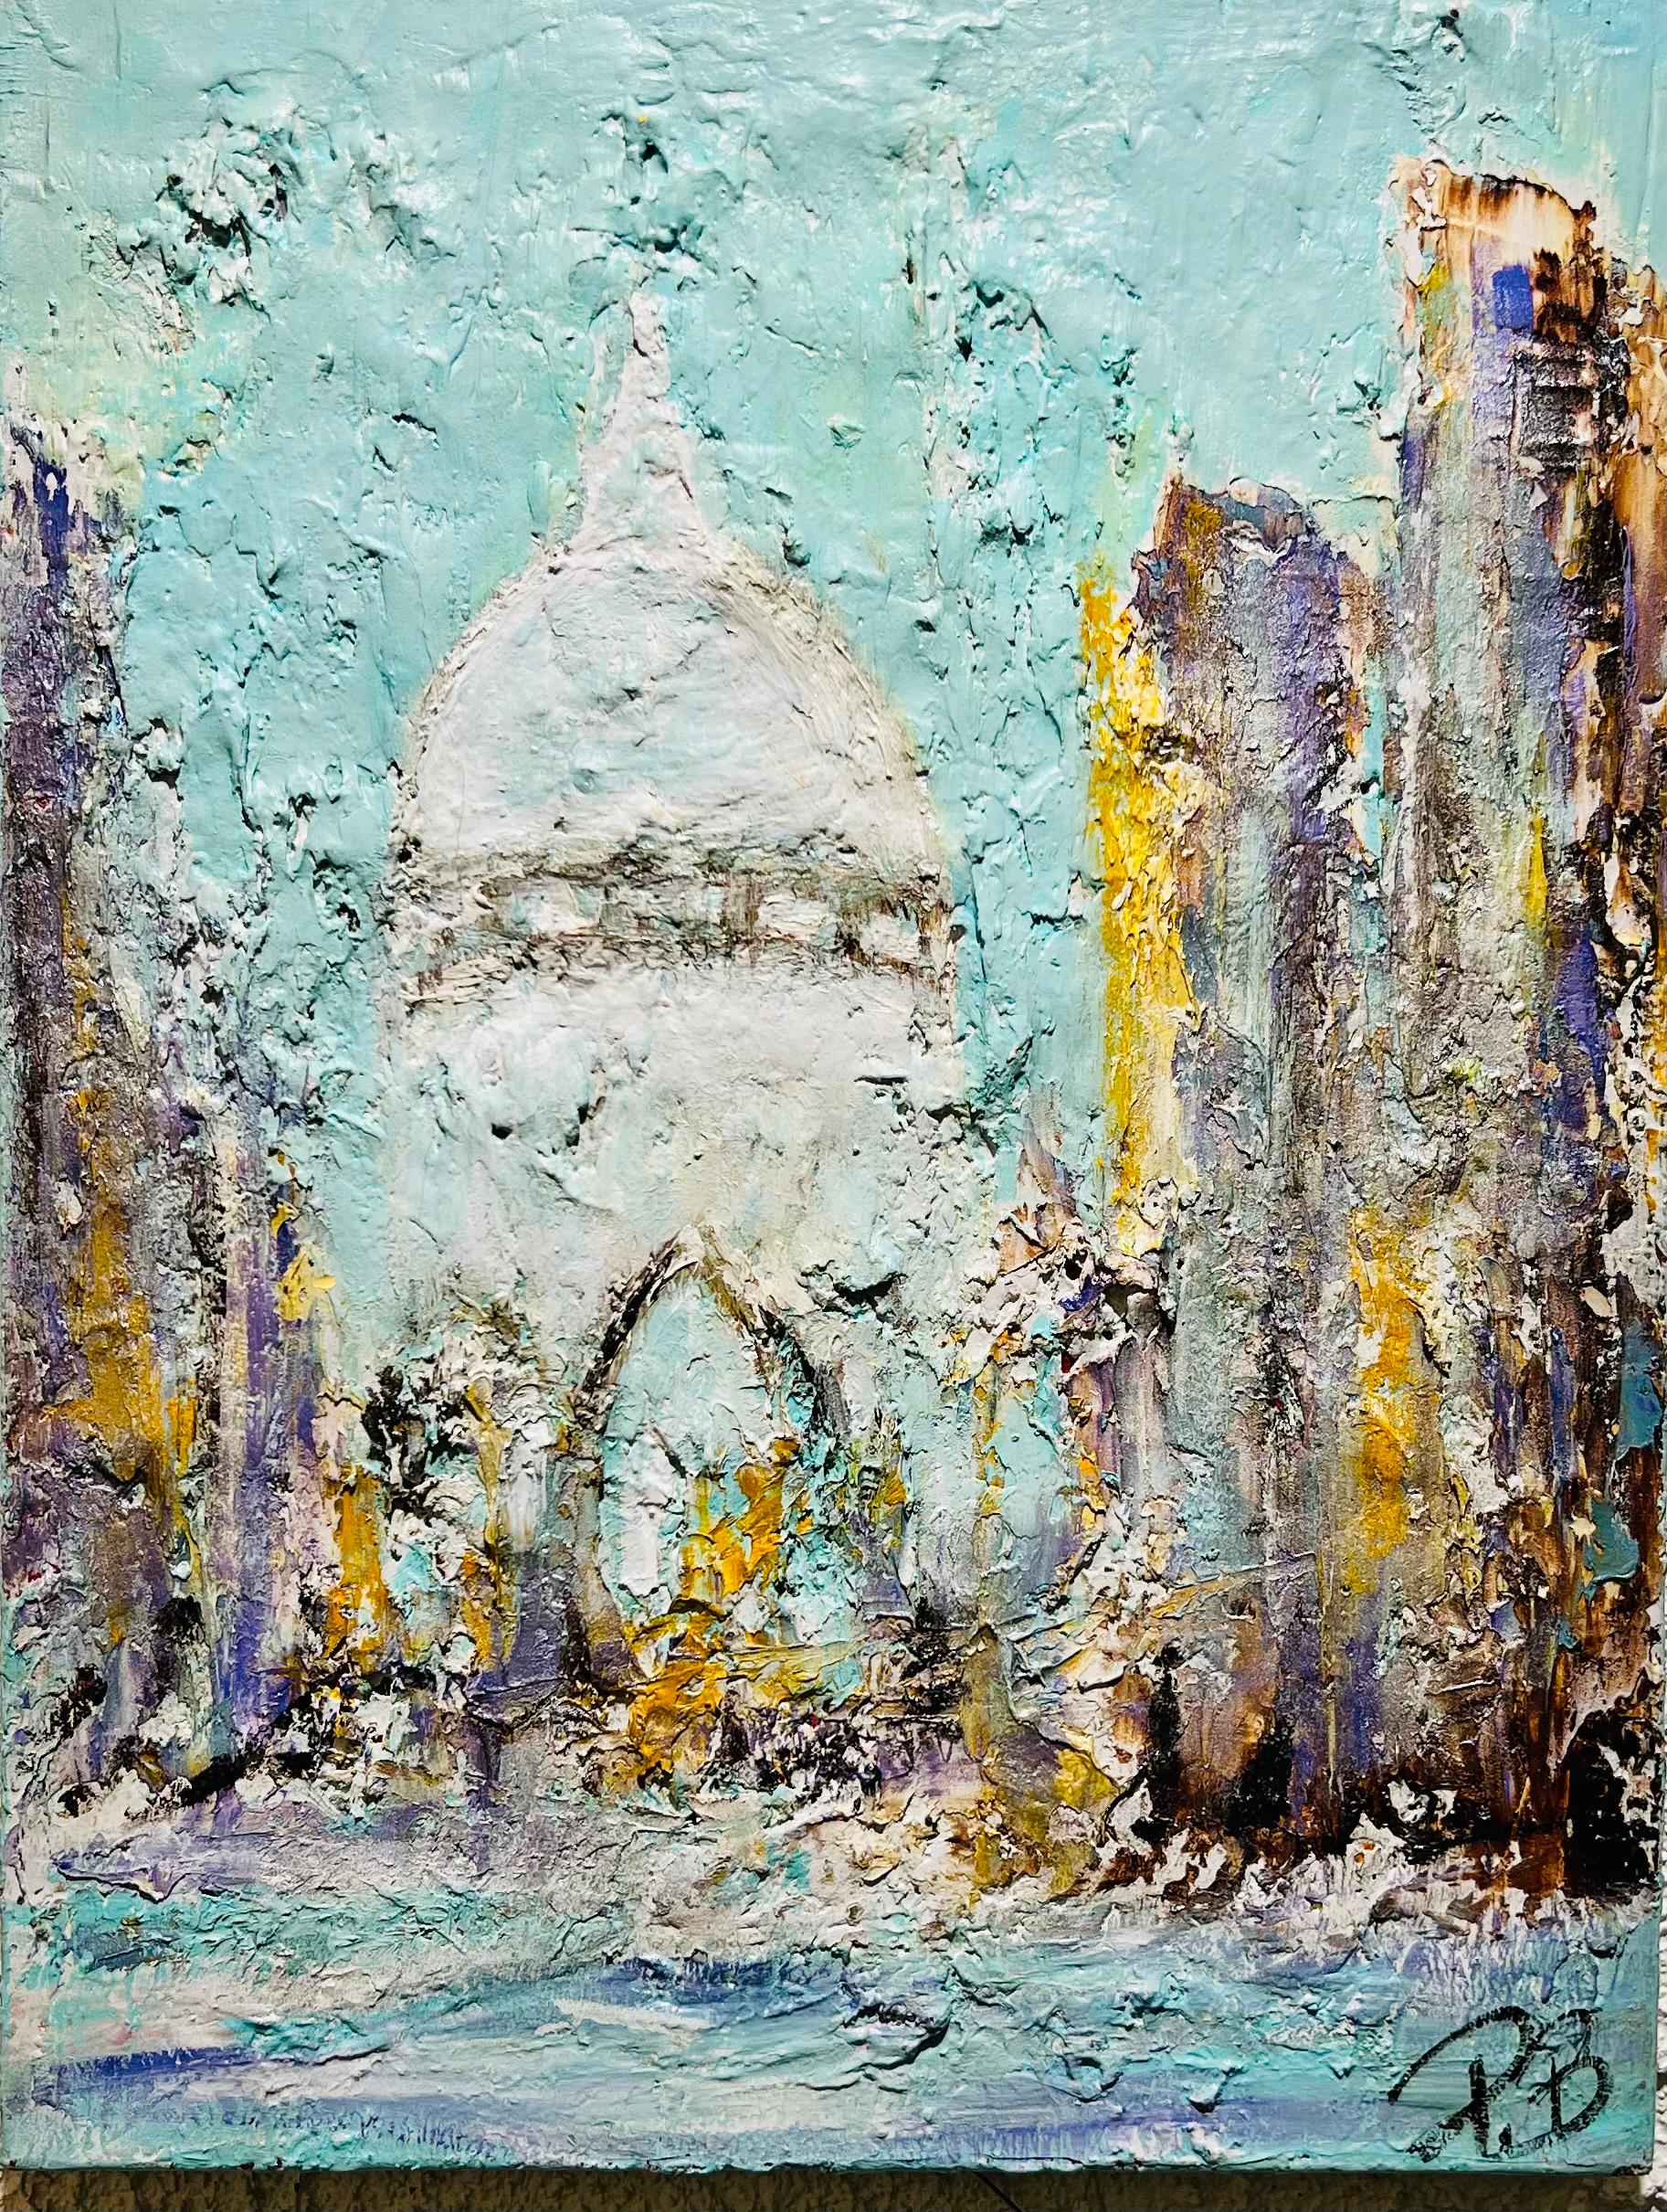 Rome - Mixed Media Art by Patrice Brunet 